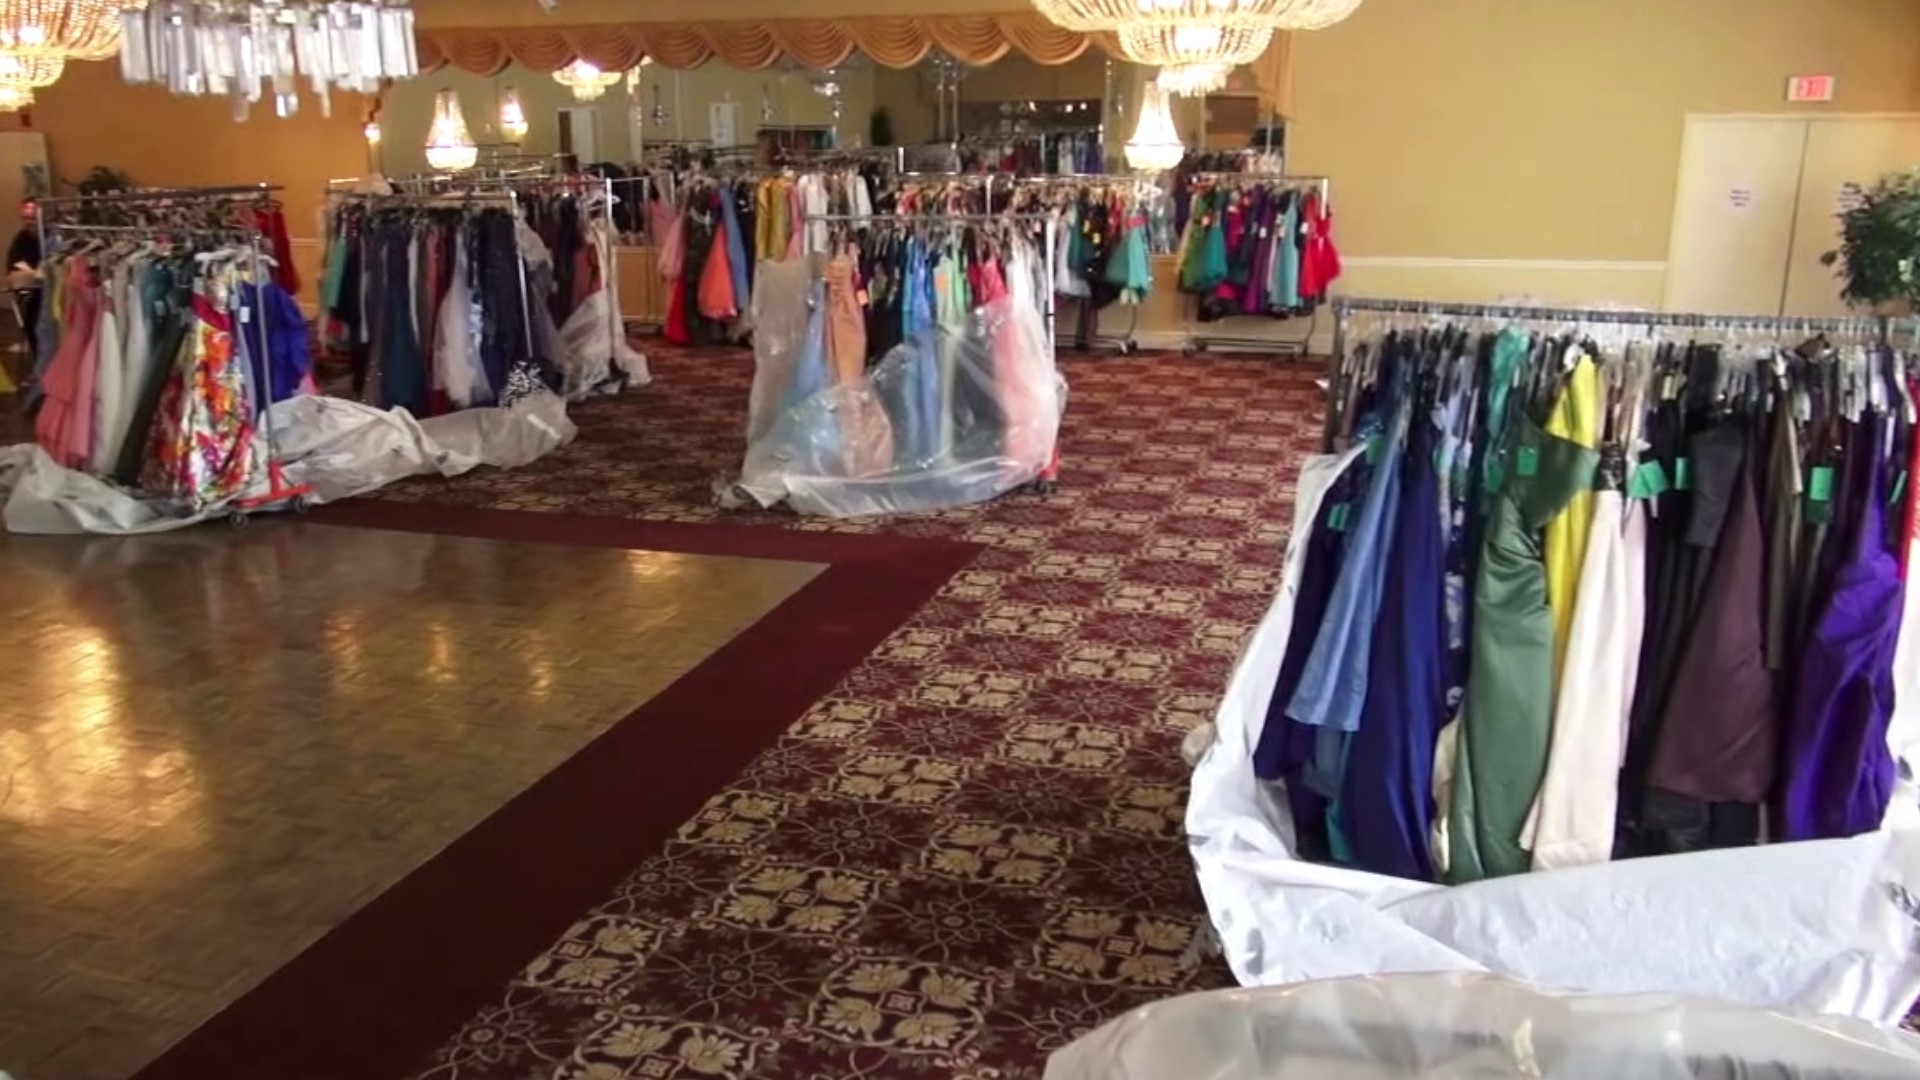 Prom season will soon be here, and one organization in Lackawanna County wants to make it easier for everyone to look their best.